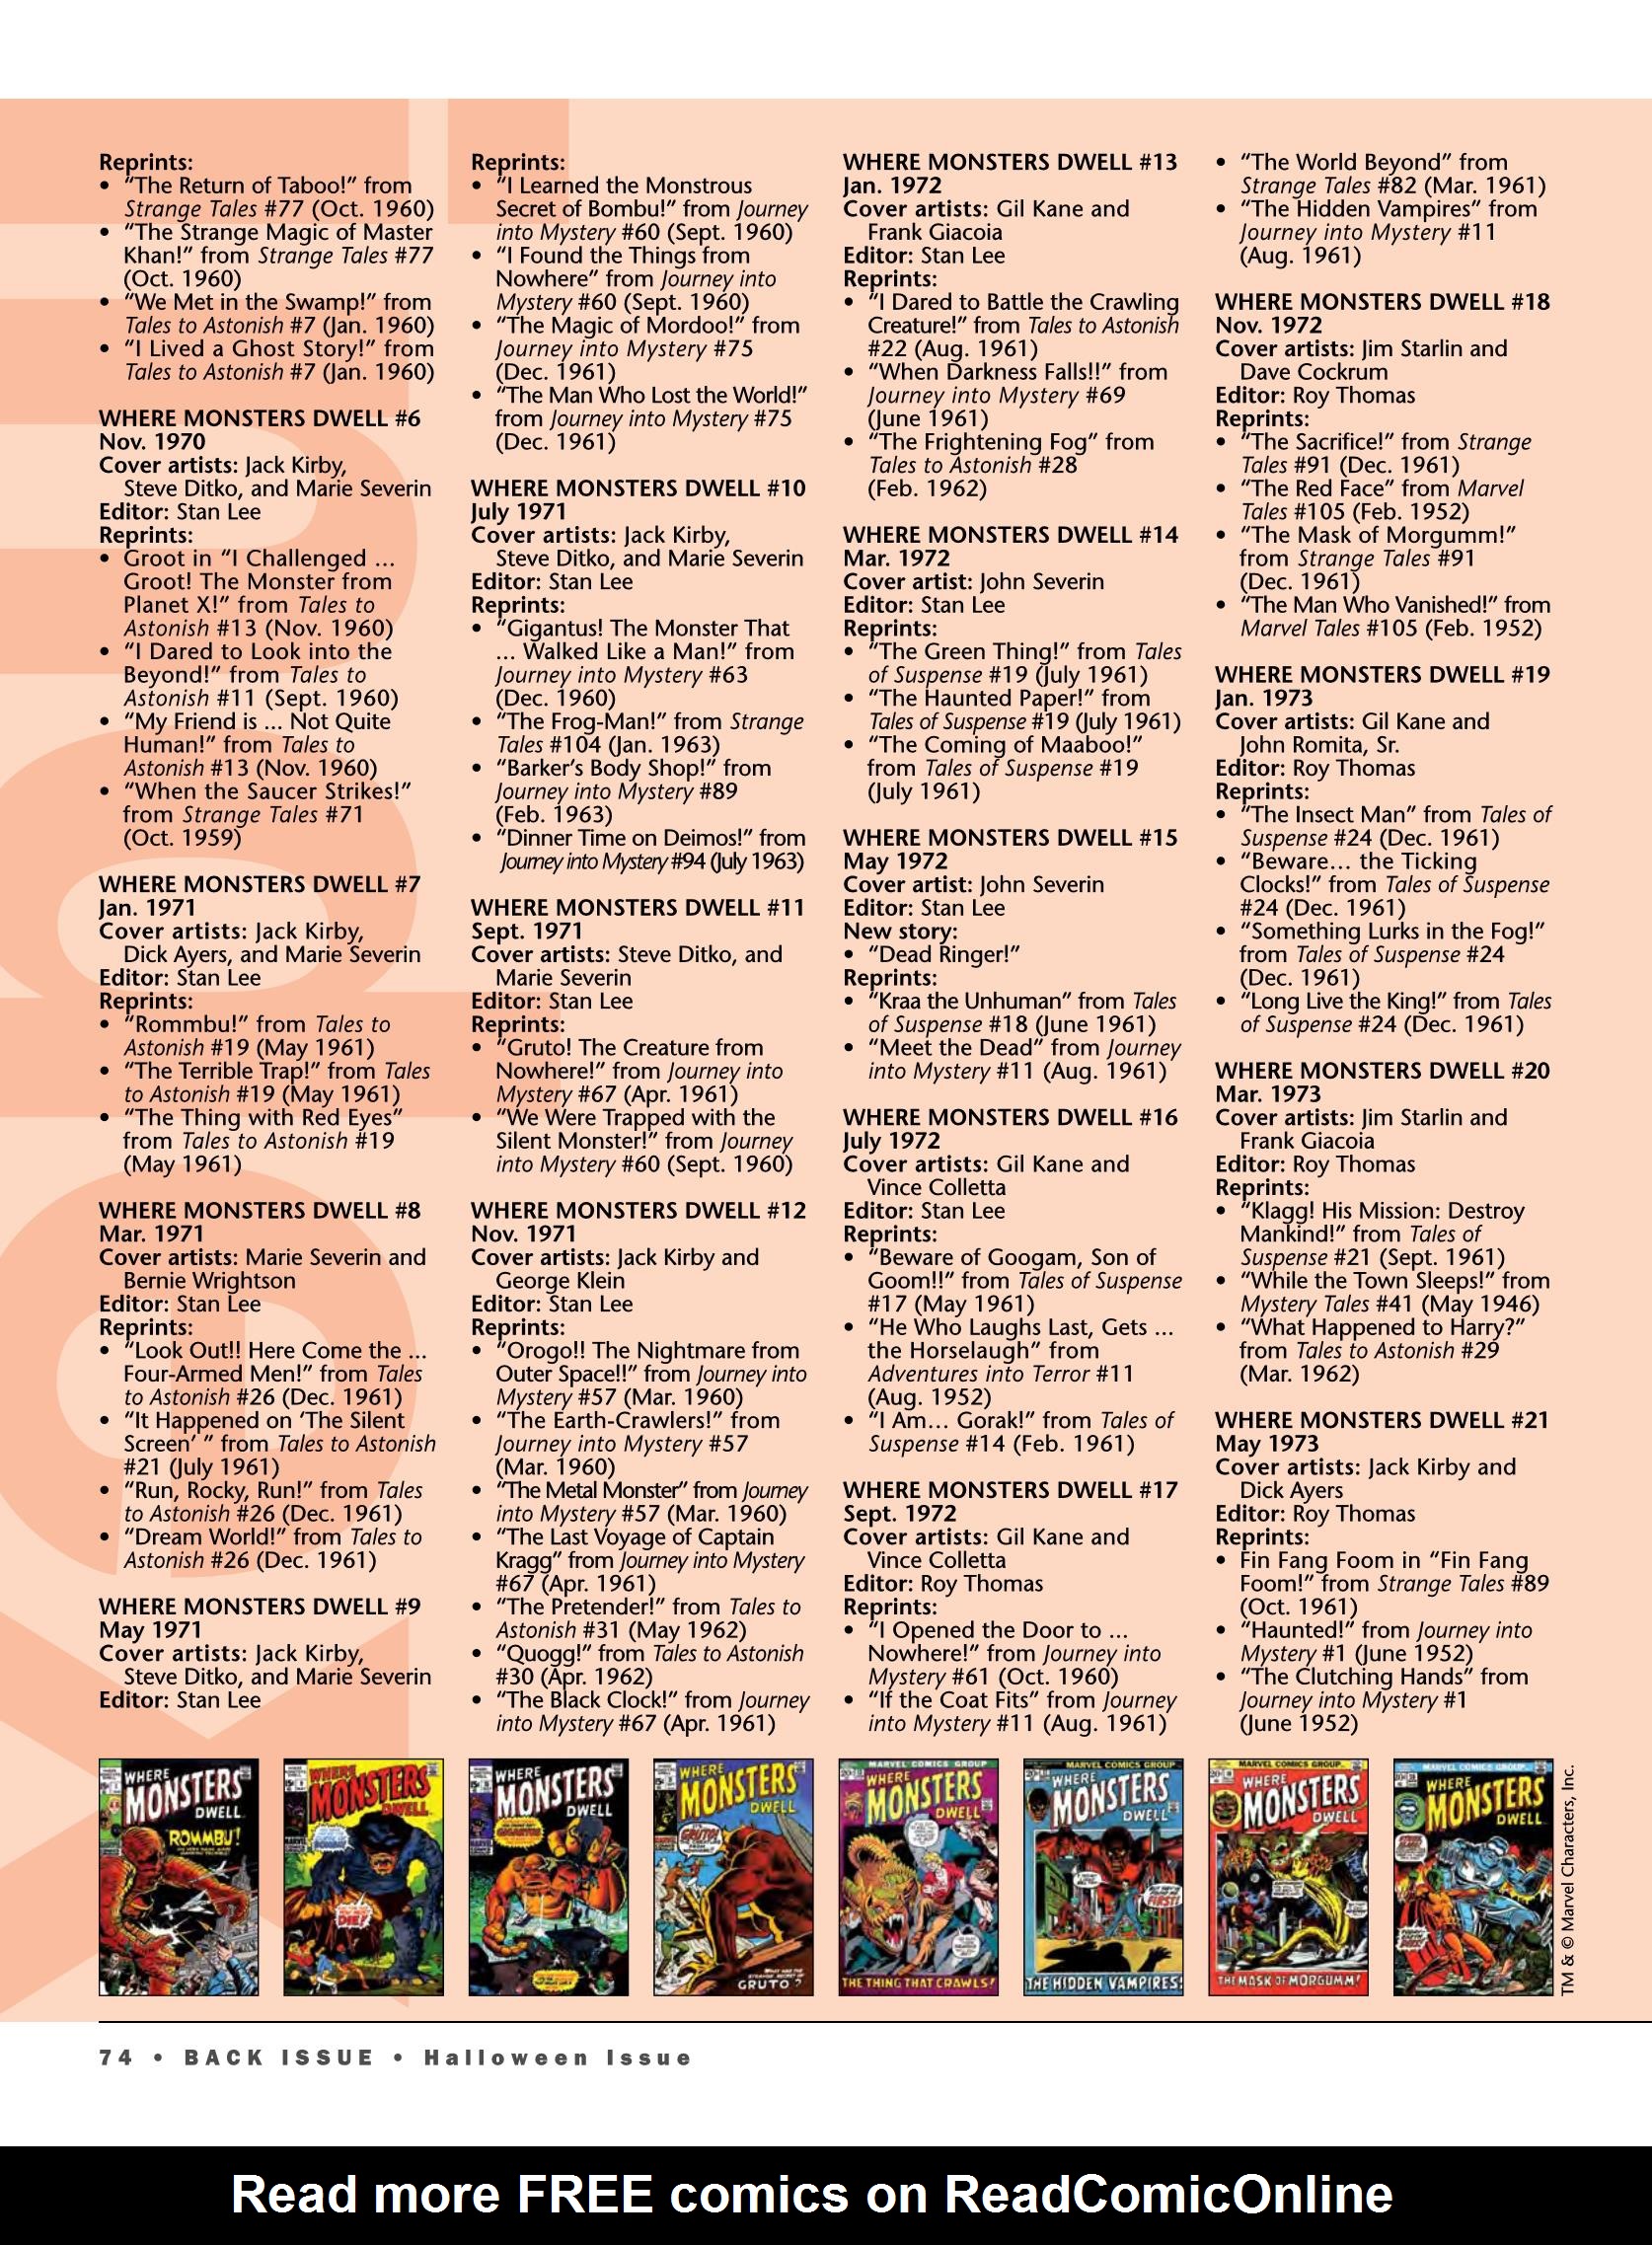 Read online Back Issue comic -  Issue #92 - 74